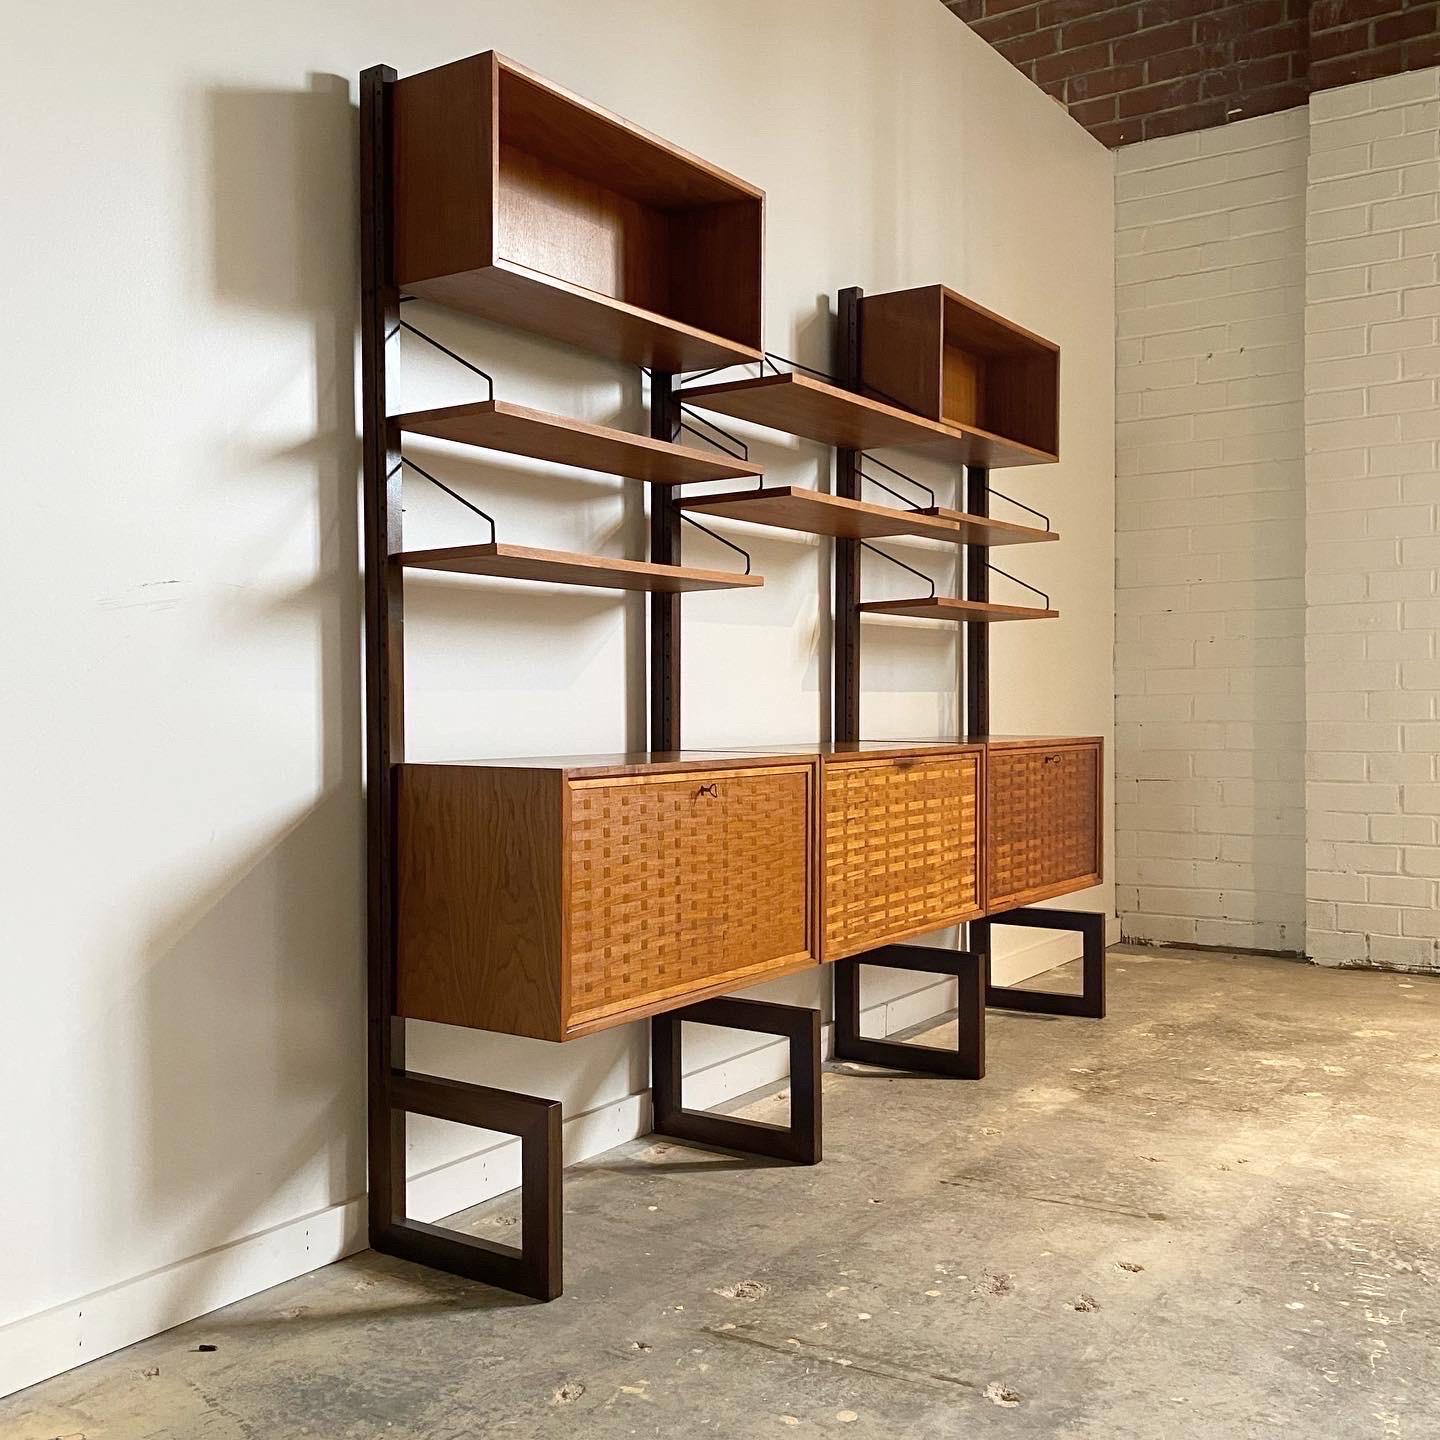 An excellent wall unit by Poul Cadovius. This piece is unique in that it is free standing and does not need to be wall mounted. Constructed of teak with woven pattern to the door fronts it has a striking look. Can be reconfigured how you like with